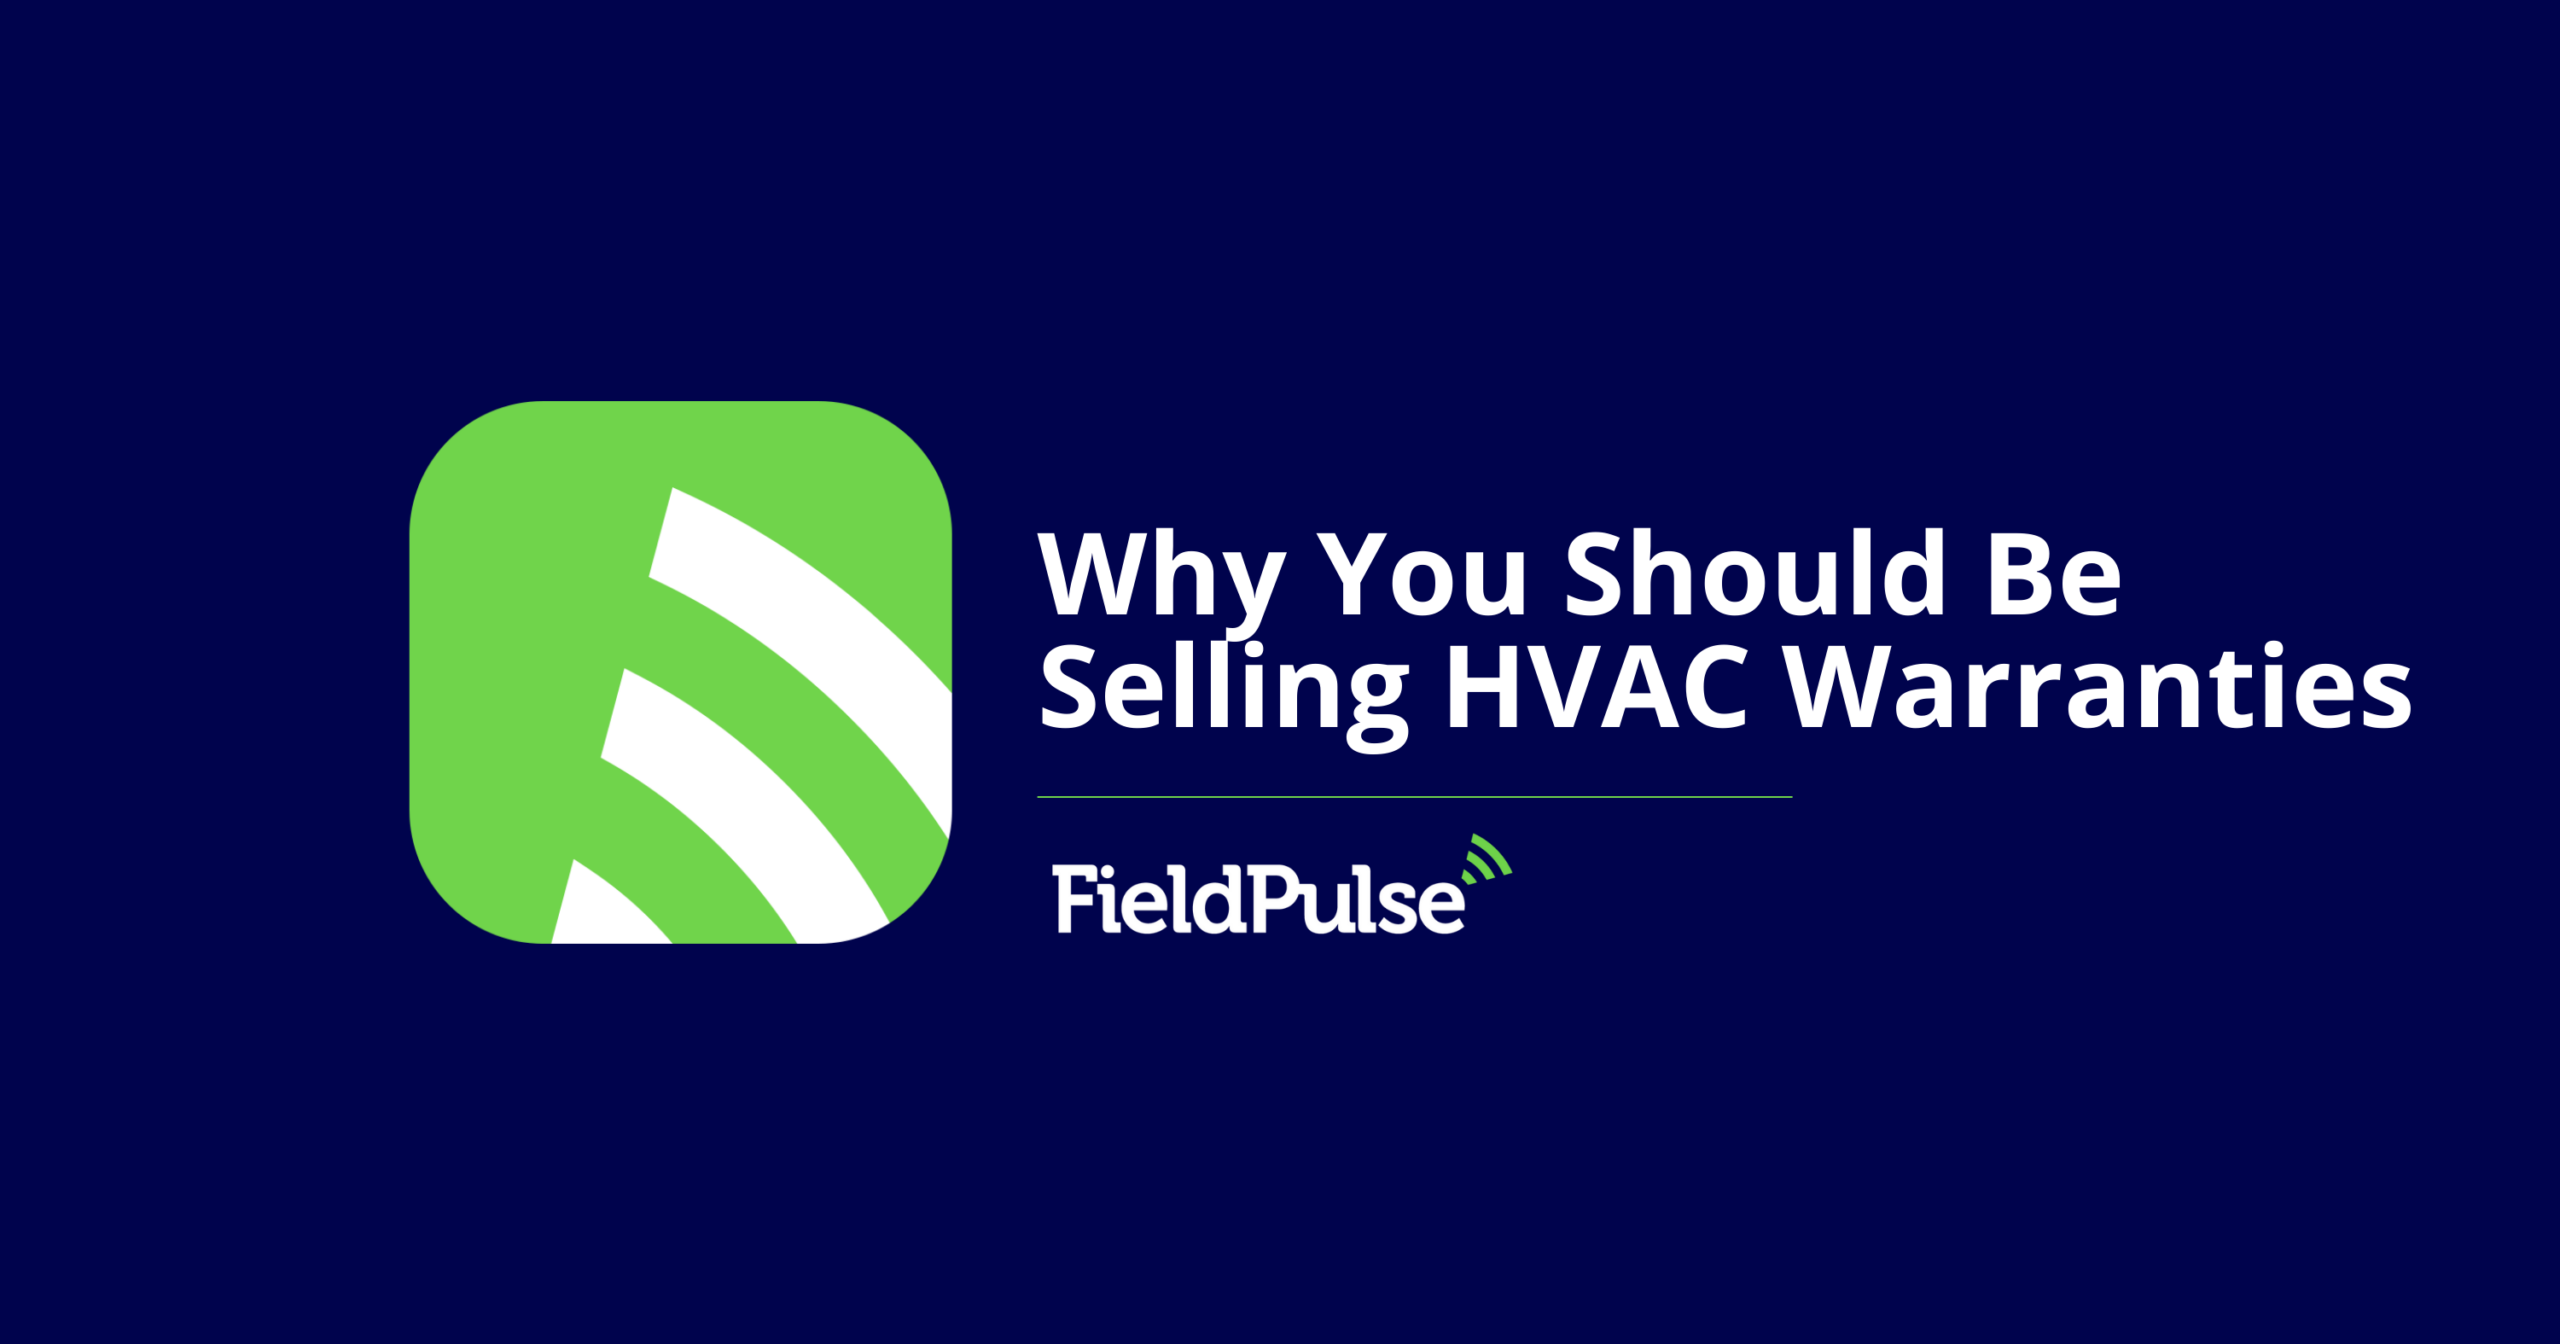 Why You Should Be Selling HVAC Warranties